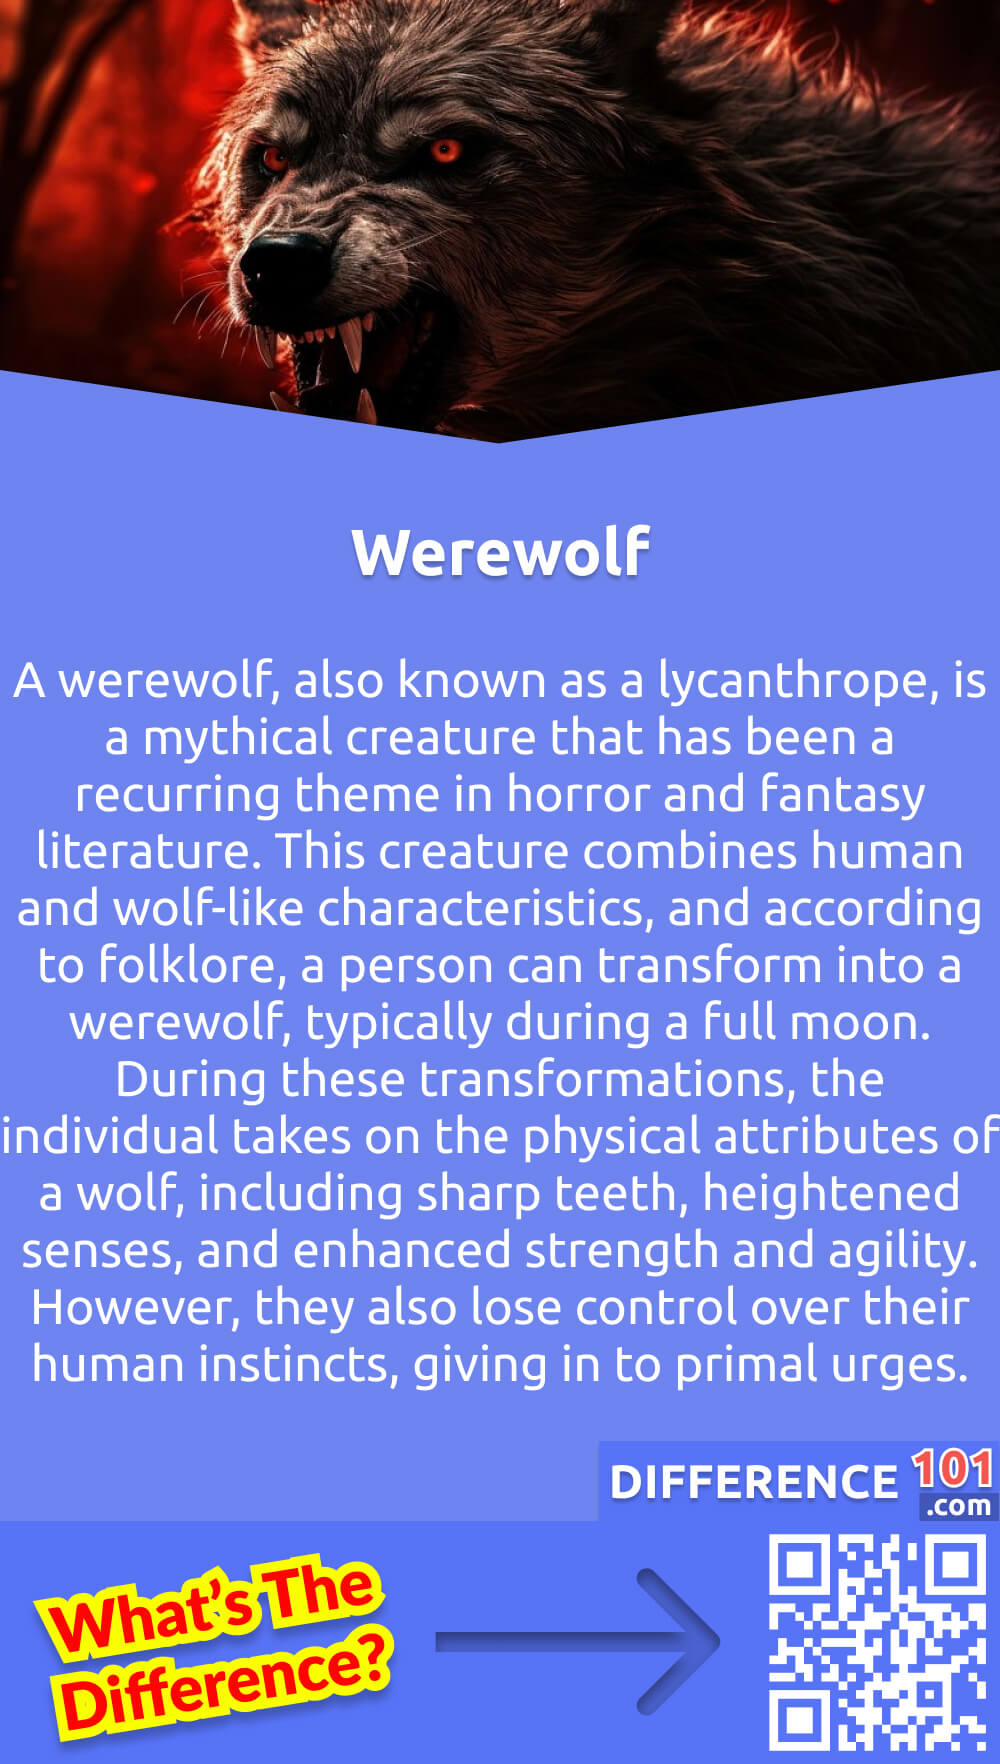 What Is Werewolf? A werewolf, also known as a lycanthrope, is a mythical creature that has been a recurring theme in horror and fantasy literature. This creature combines human and wolf-like characteristics, and according to folklore, a person can transform into a werewolf, typically during a full moon. During these transformations, the individual takes on the physical attributes of a wolf, including sharp teeth, heightened senses, and enhanced strength and agility. However, they also lose control over their human instincts, giving in to primal urges. Werewolves are often depicted as cursed or afflicted individuals, and the condition is typically passed through a bite or a hereditary curse. The werewolf is emblematic of the struggle between human reason and animalistic instincts.